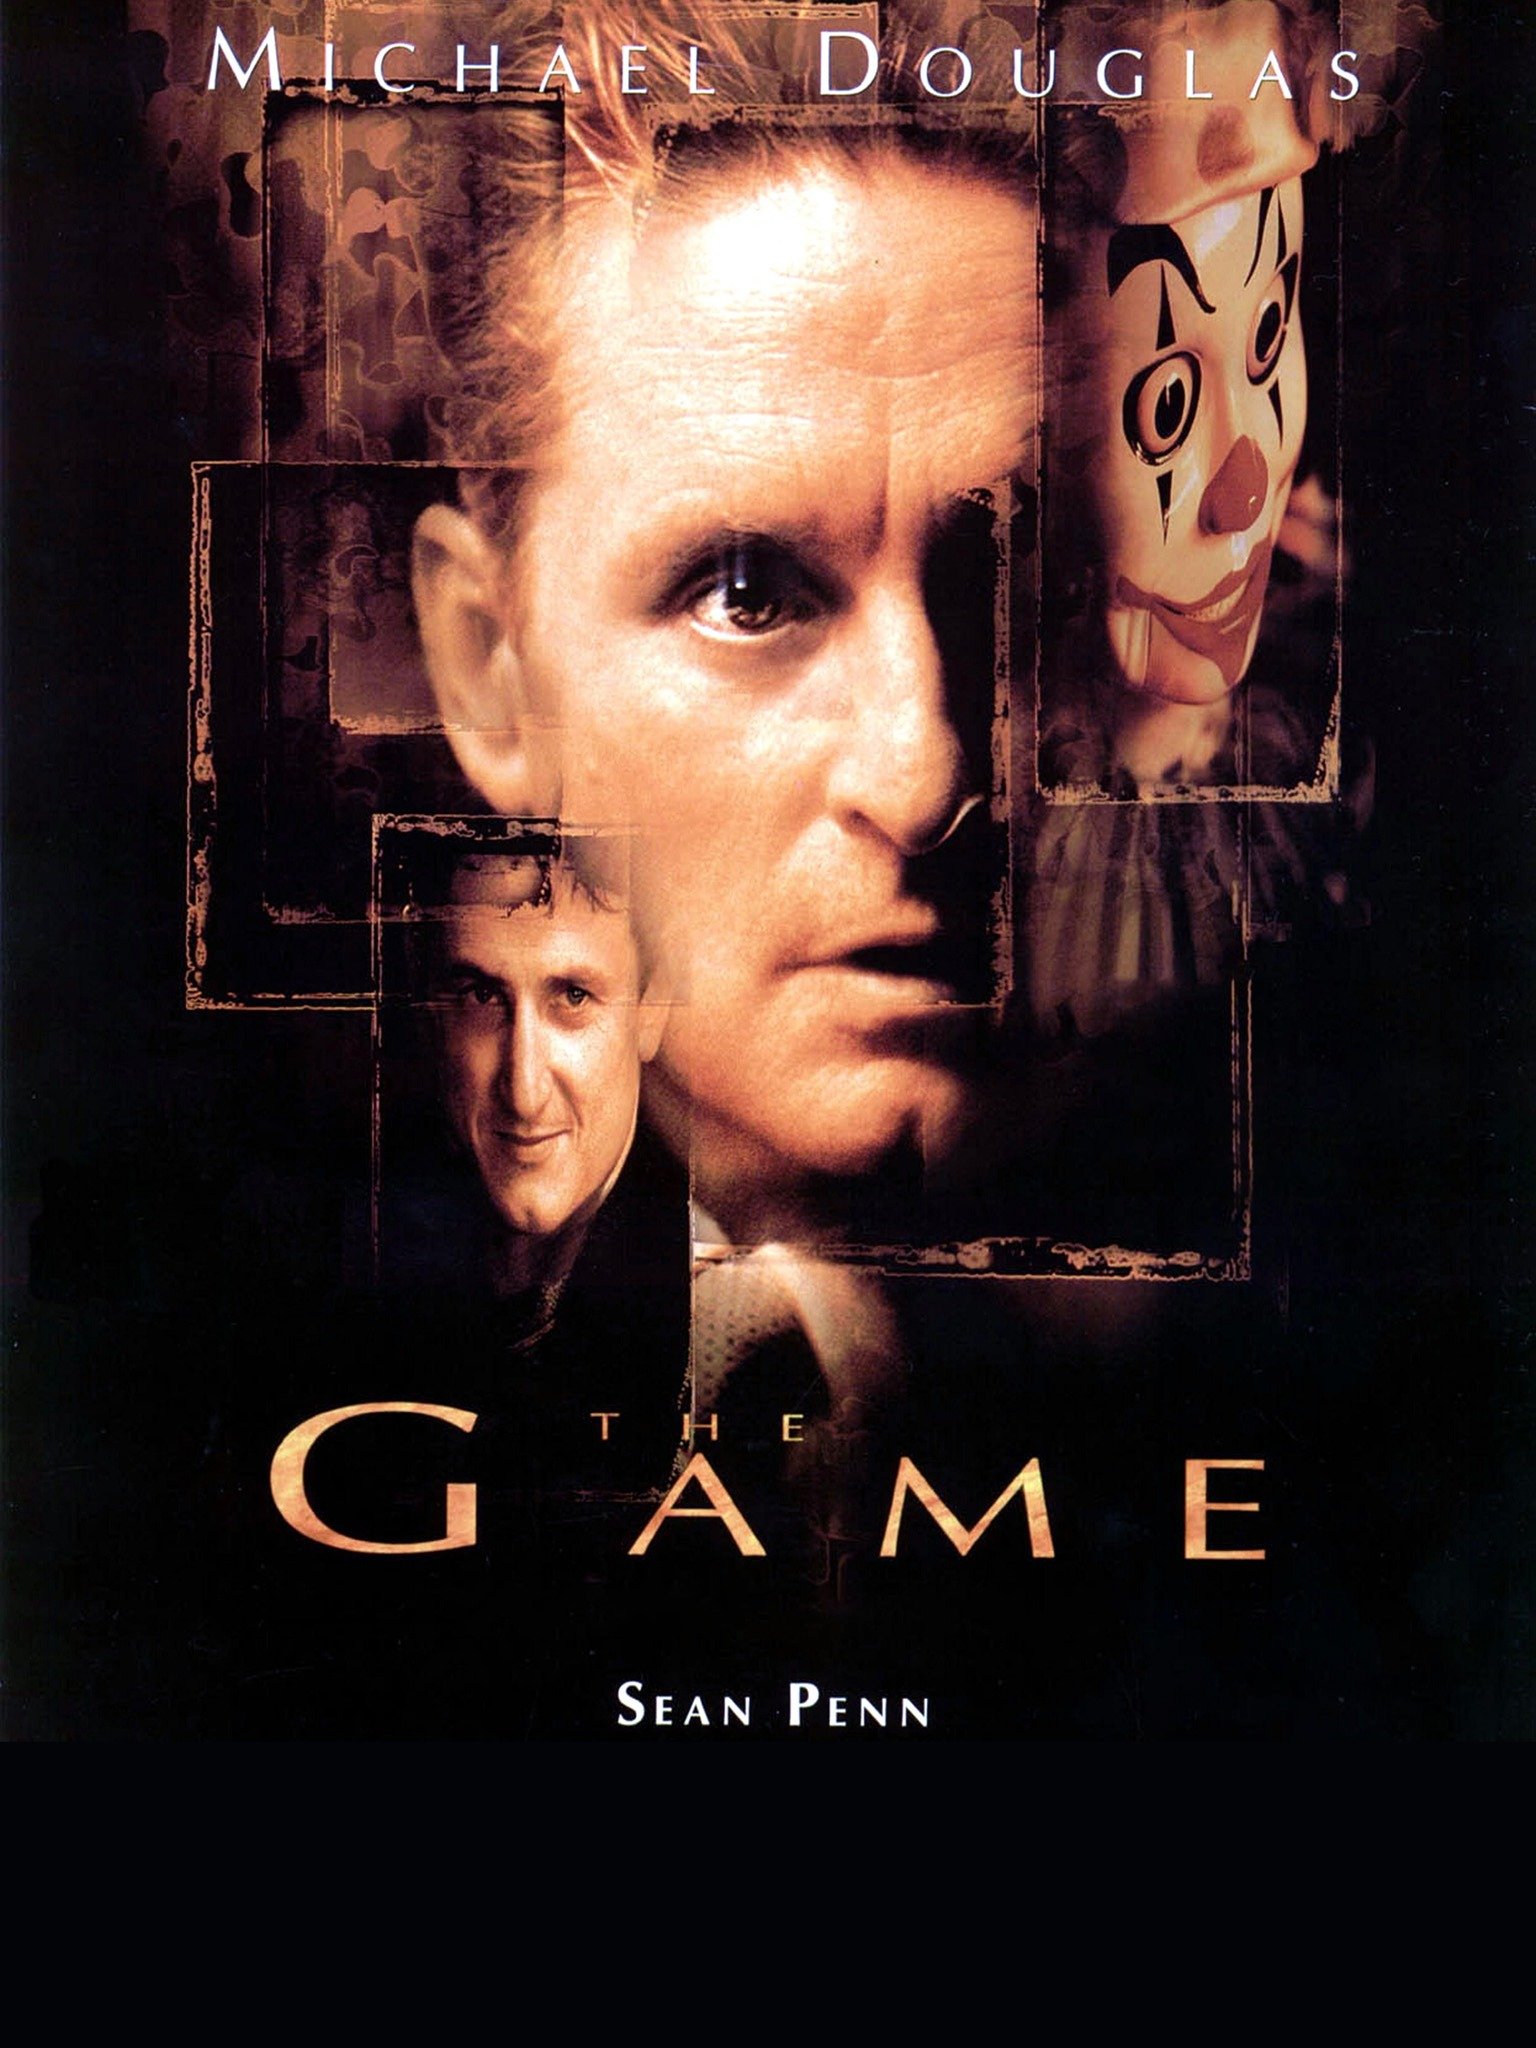 Streaming The Game 1997 Full Movies Online